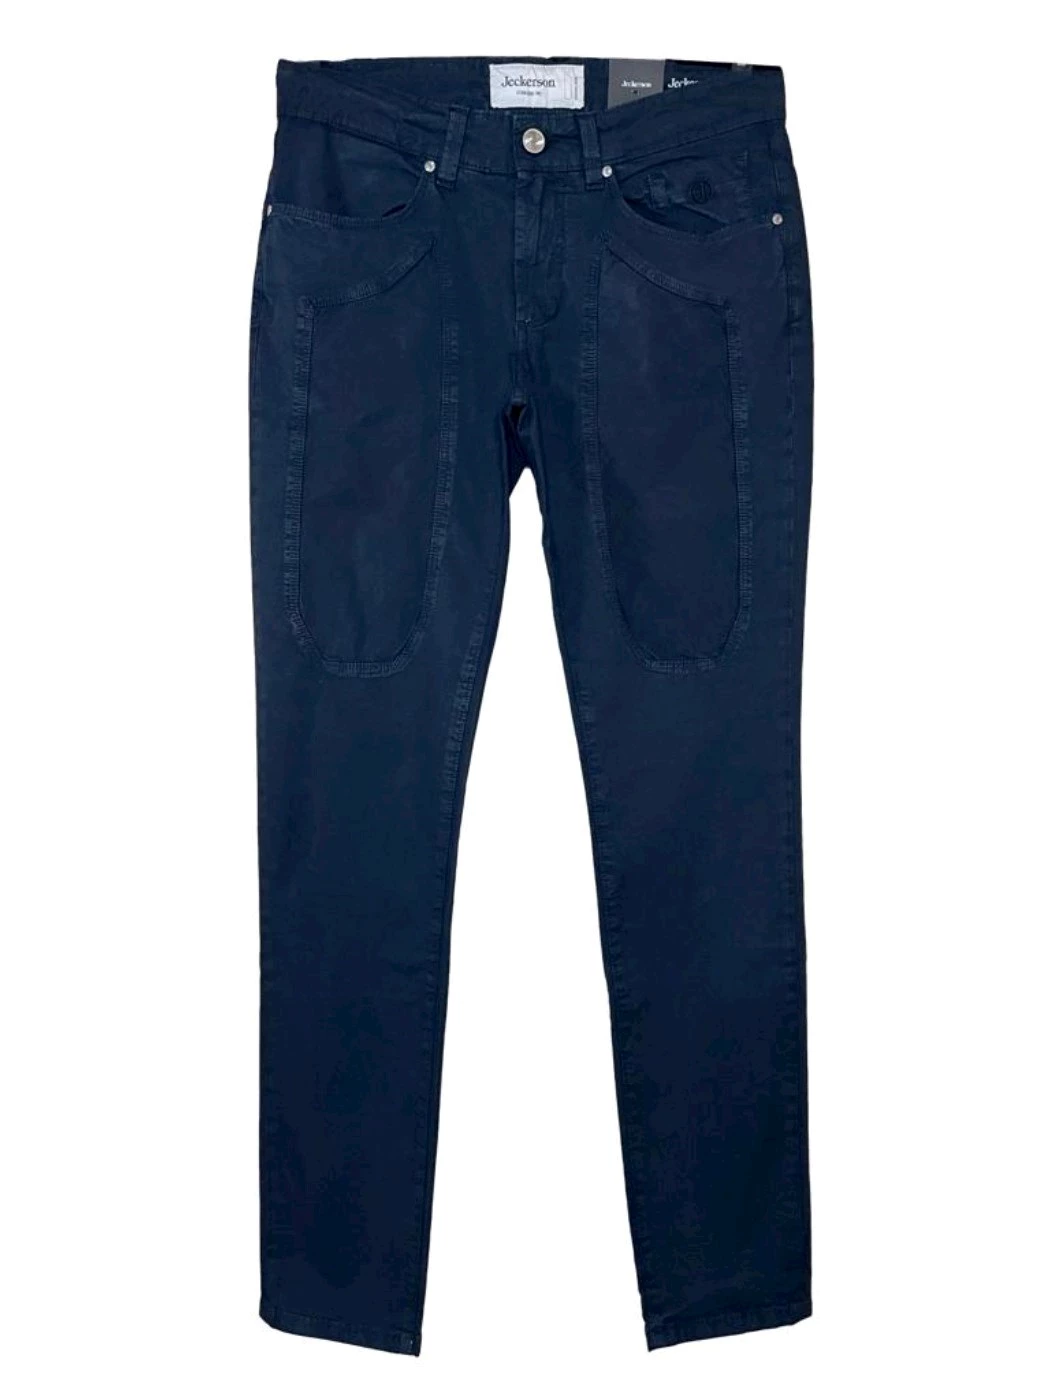 Trousers with Jeckerson patches